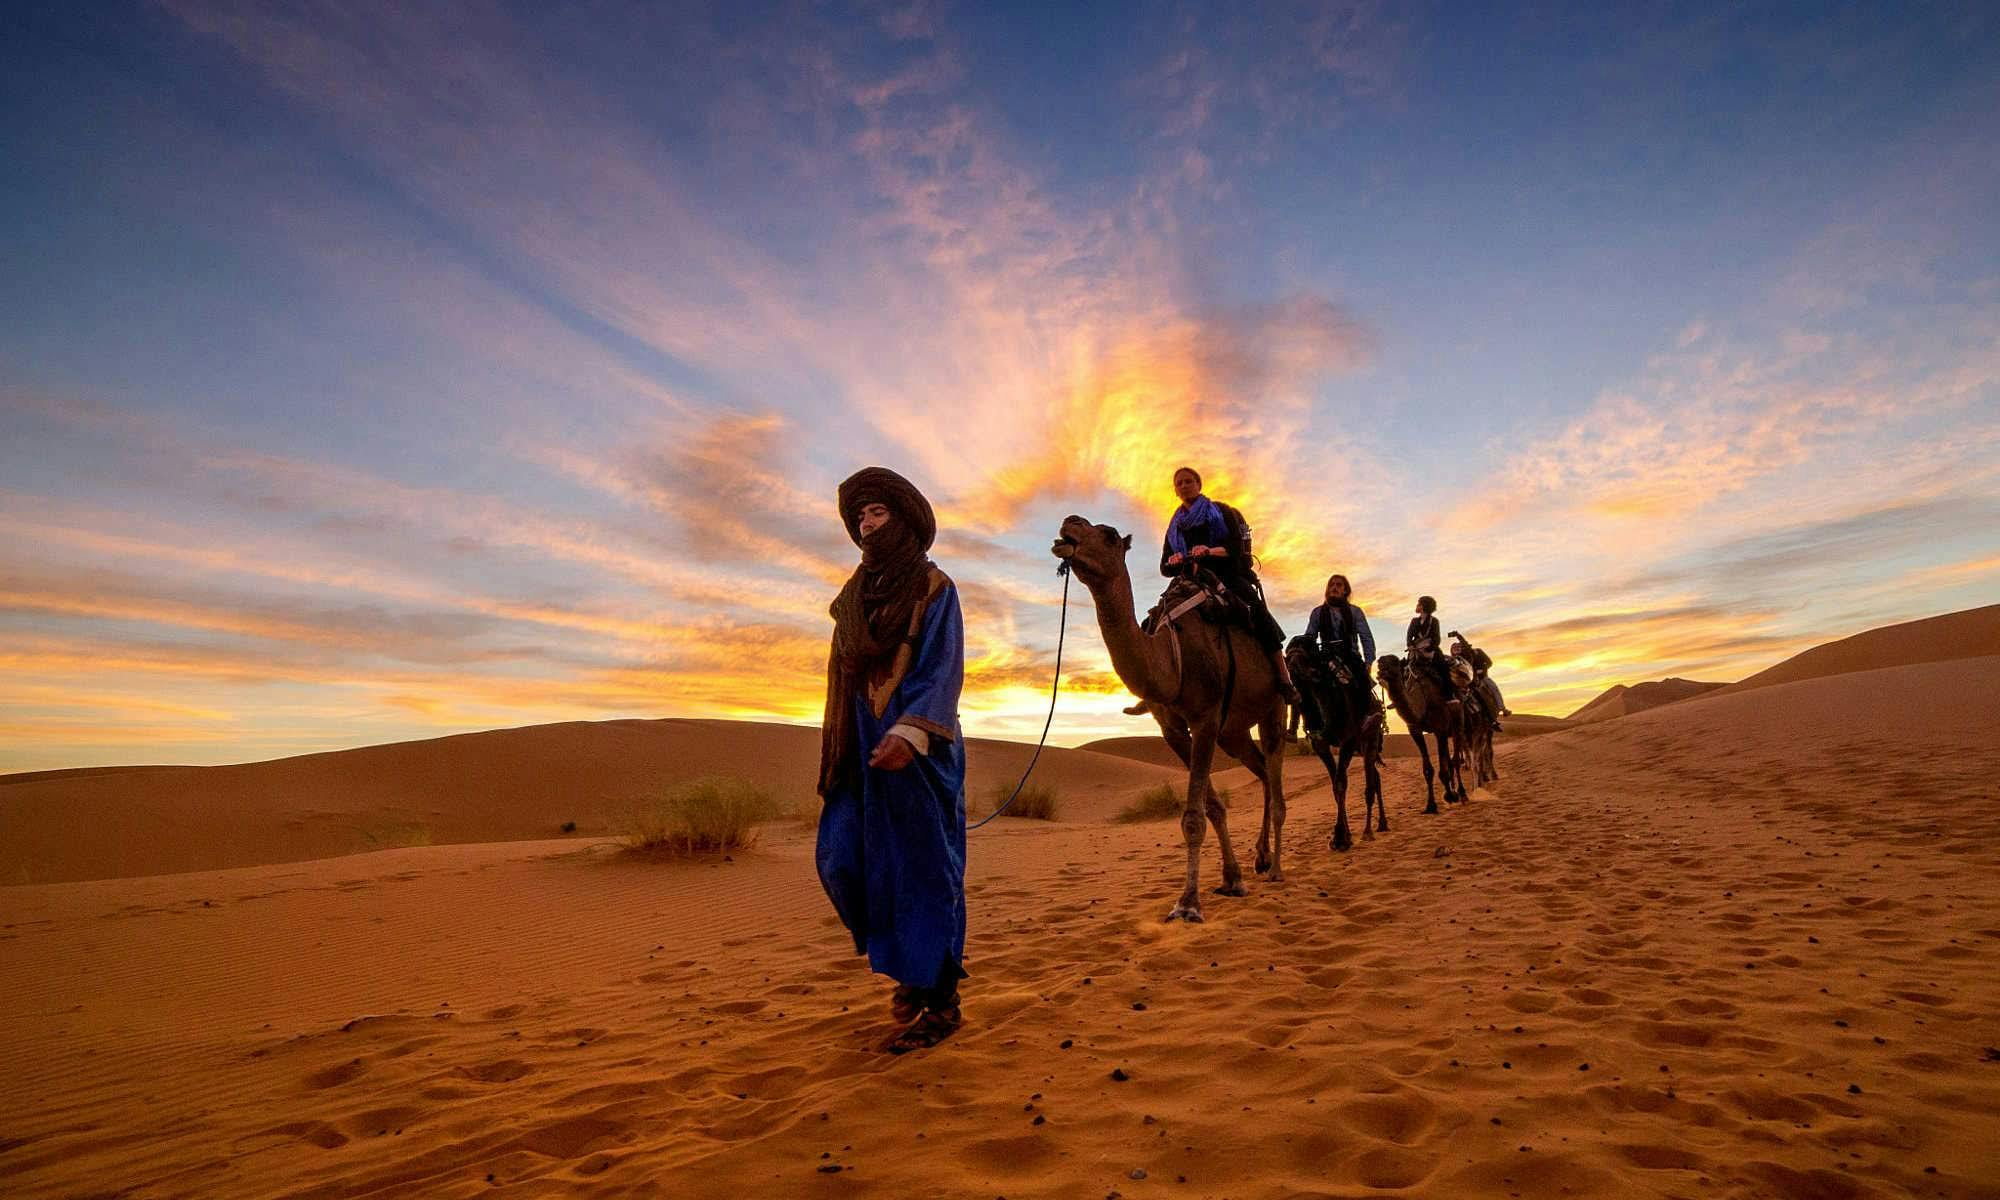 Desert Tour Morocco Merzouga 3 days and 2 nights from Marrakech Musement